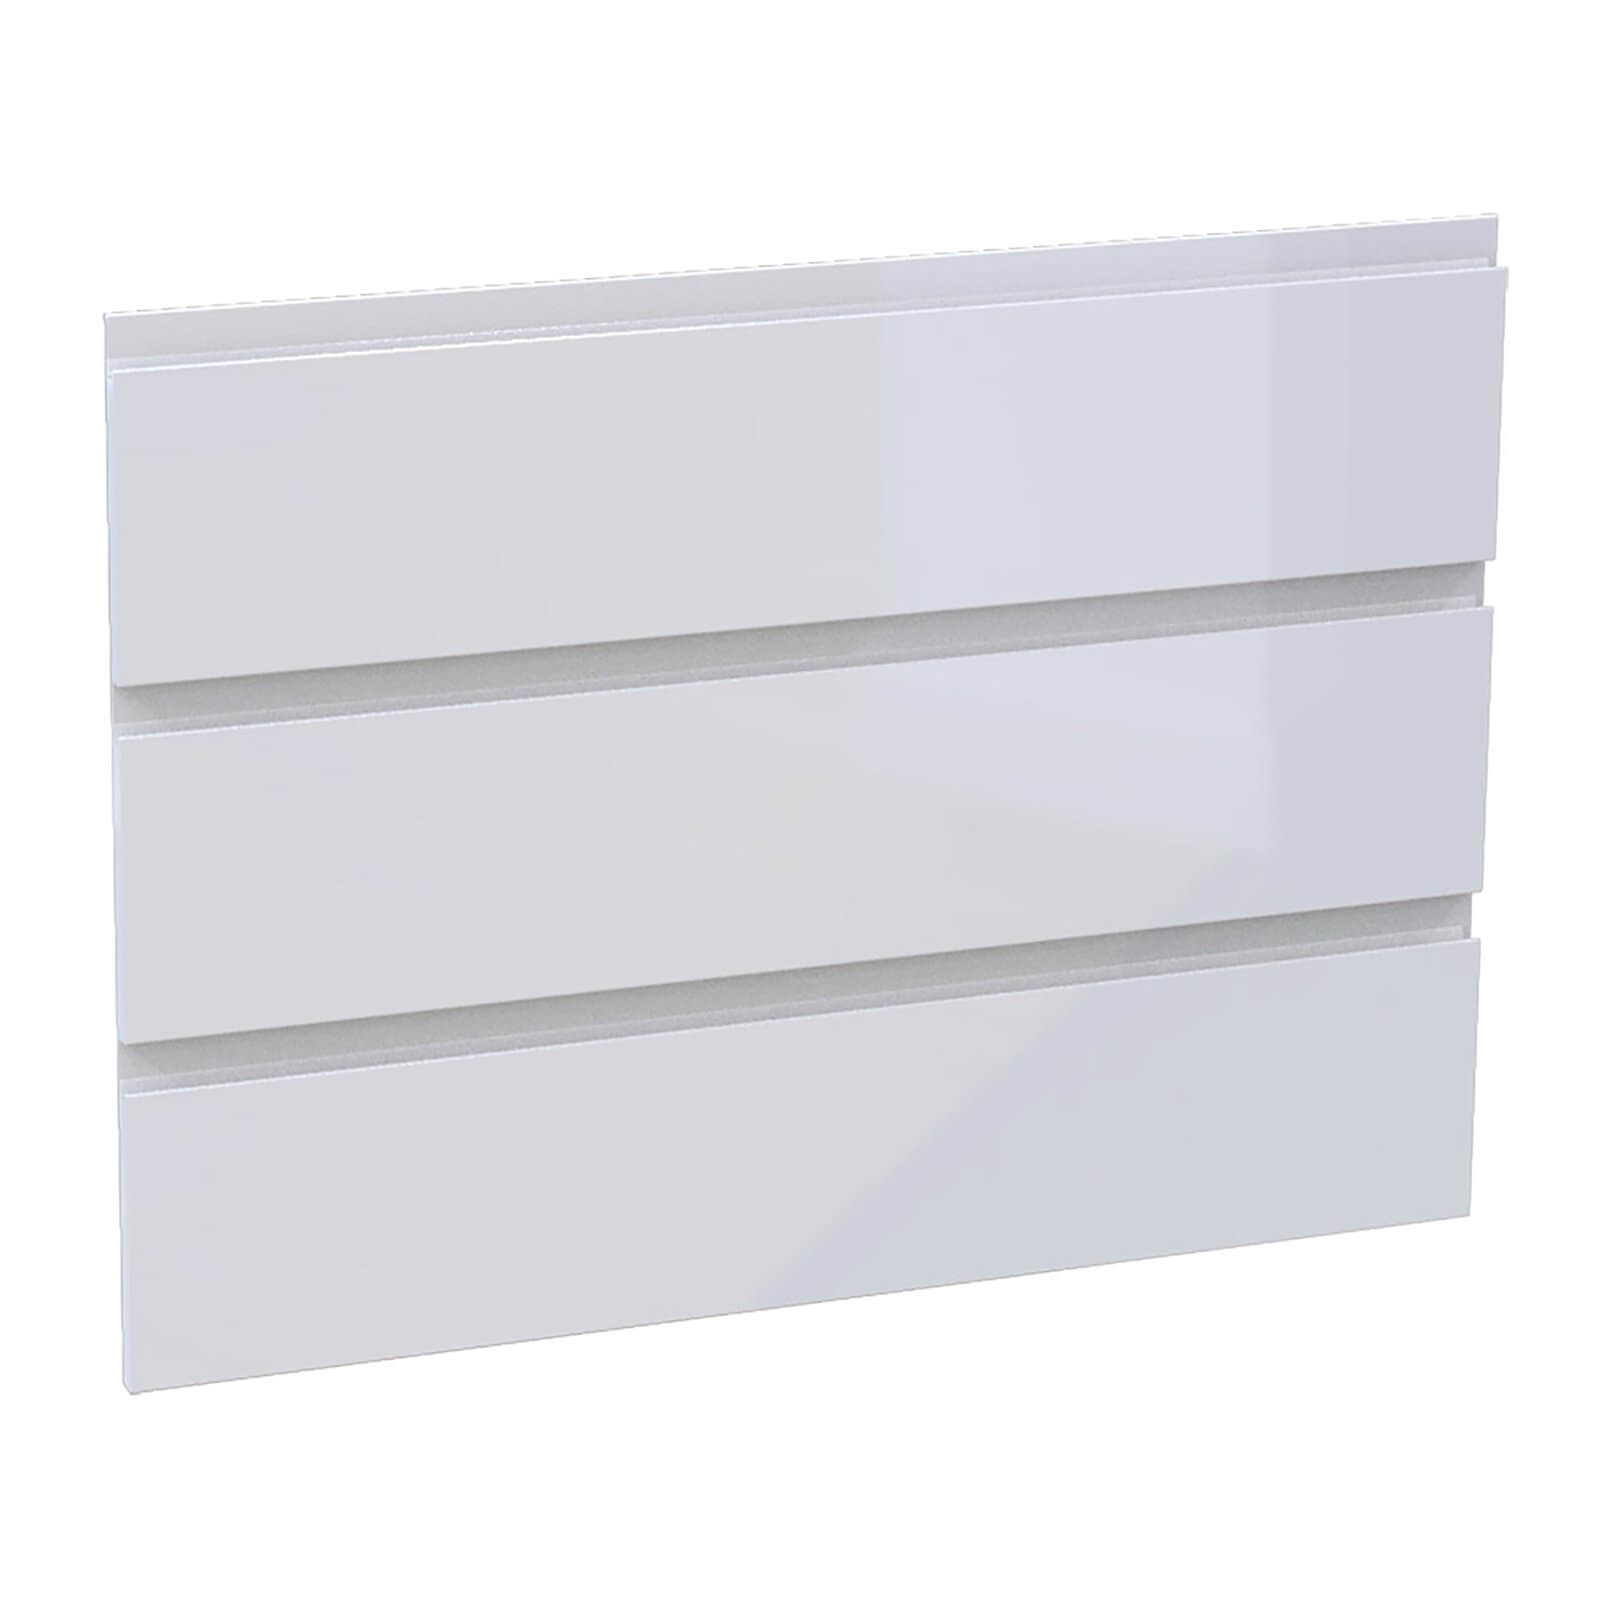 House Beautiful Escape Wide Chest of Drawers Fronts - Gloss White Handleless